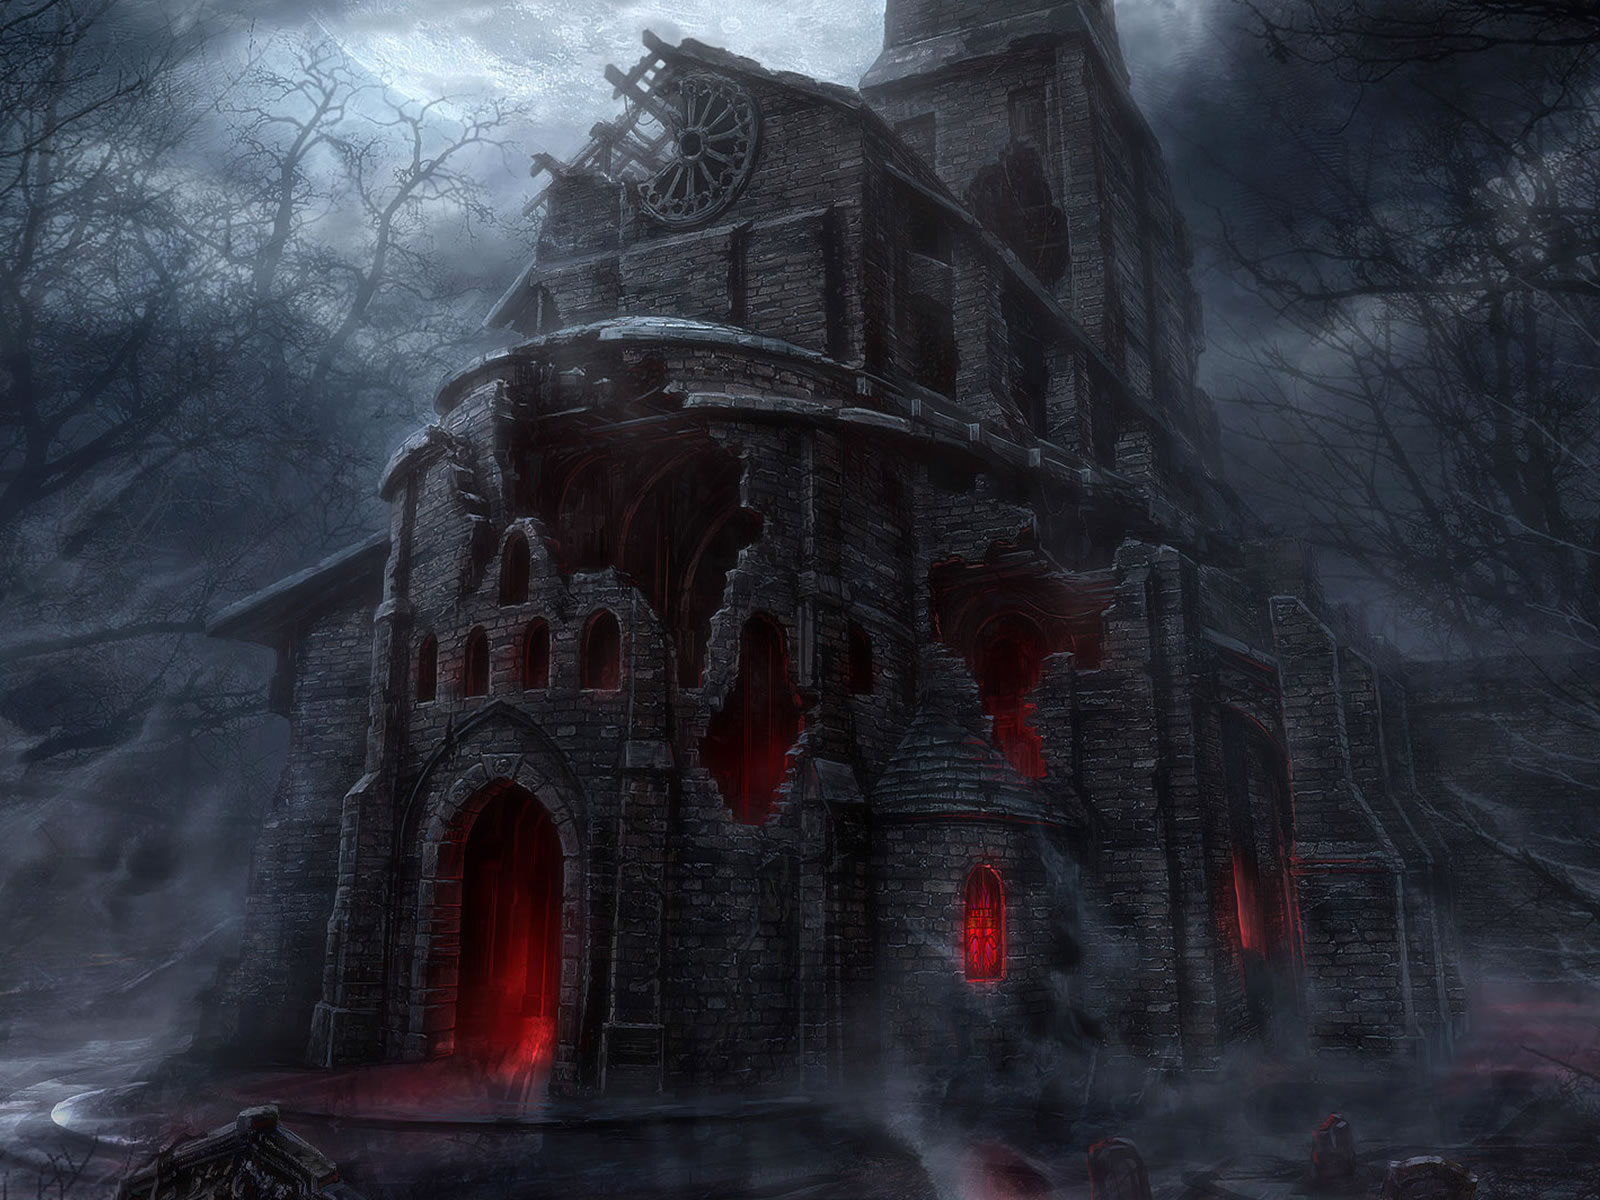 3D FANTASY BIG SCARY HOUSE WALLPAPER - (#118) - HD Wallpapers ...